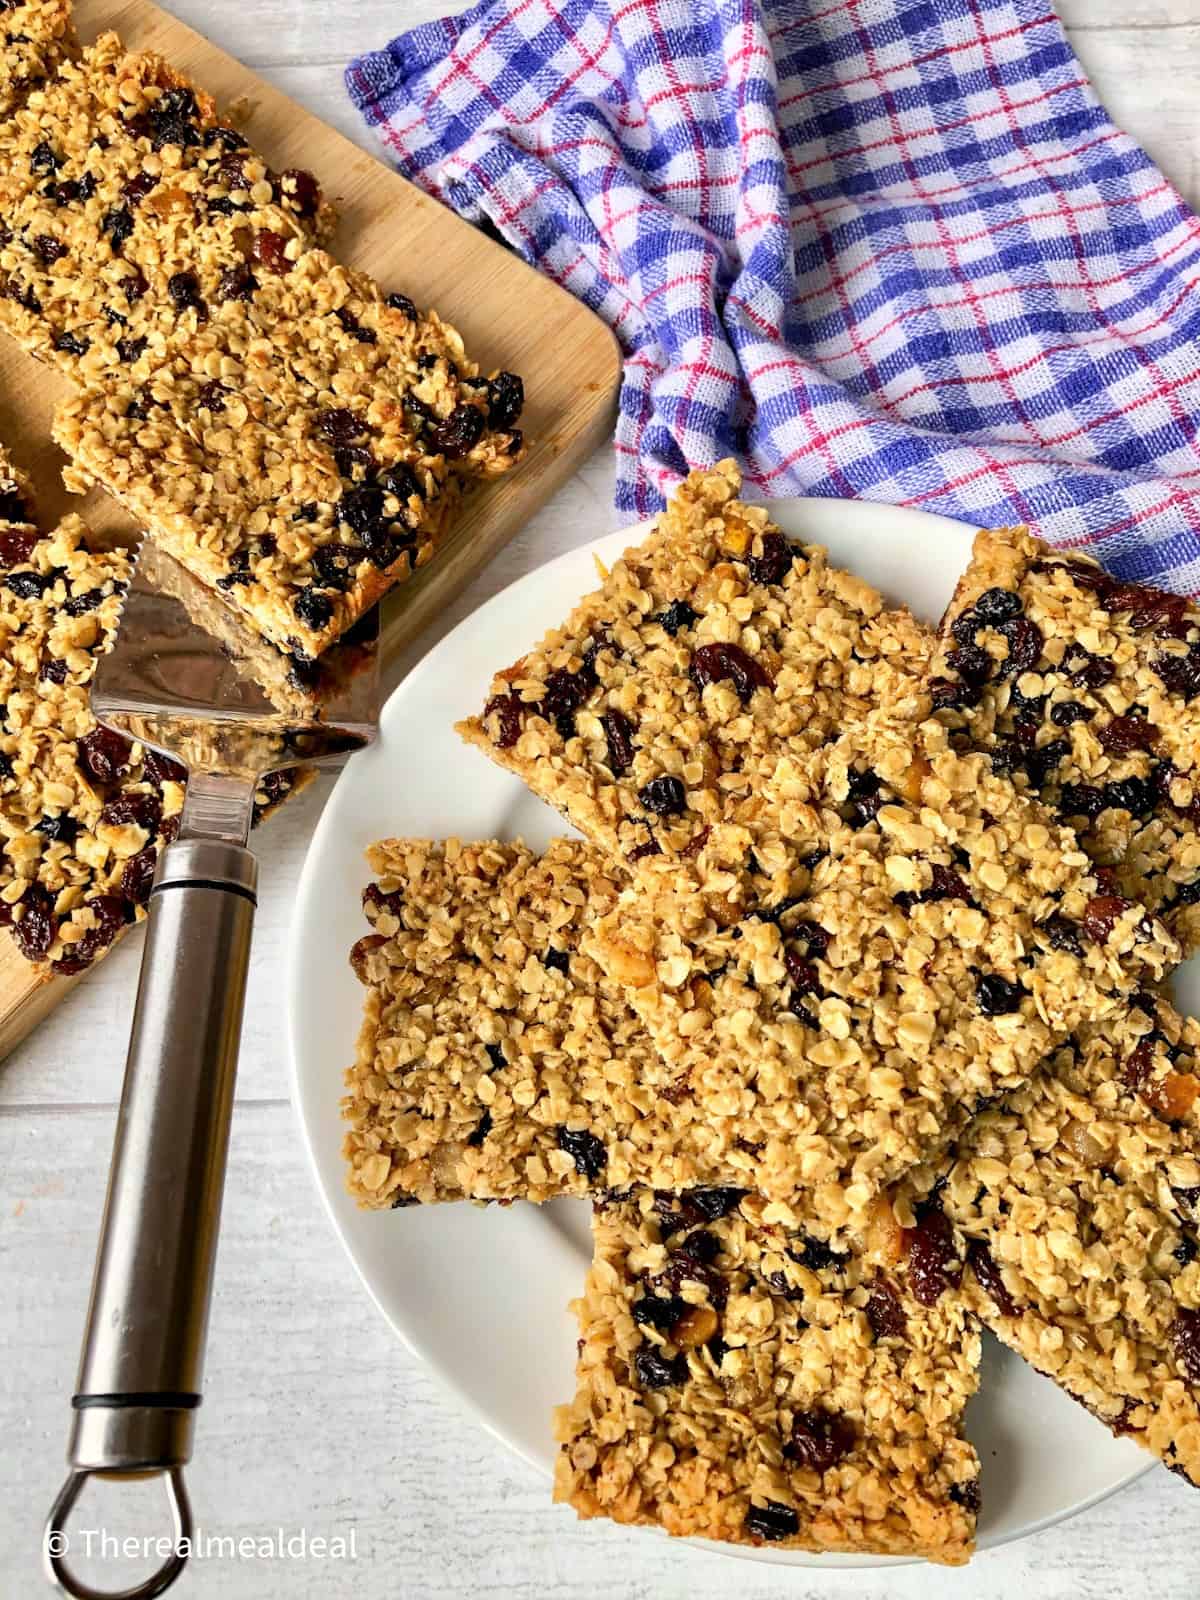 fruit flapjacks cut into squares on plate.